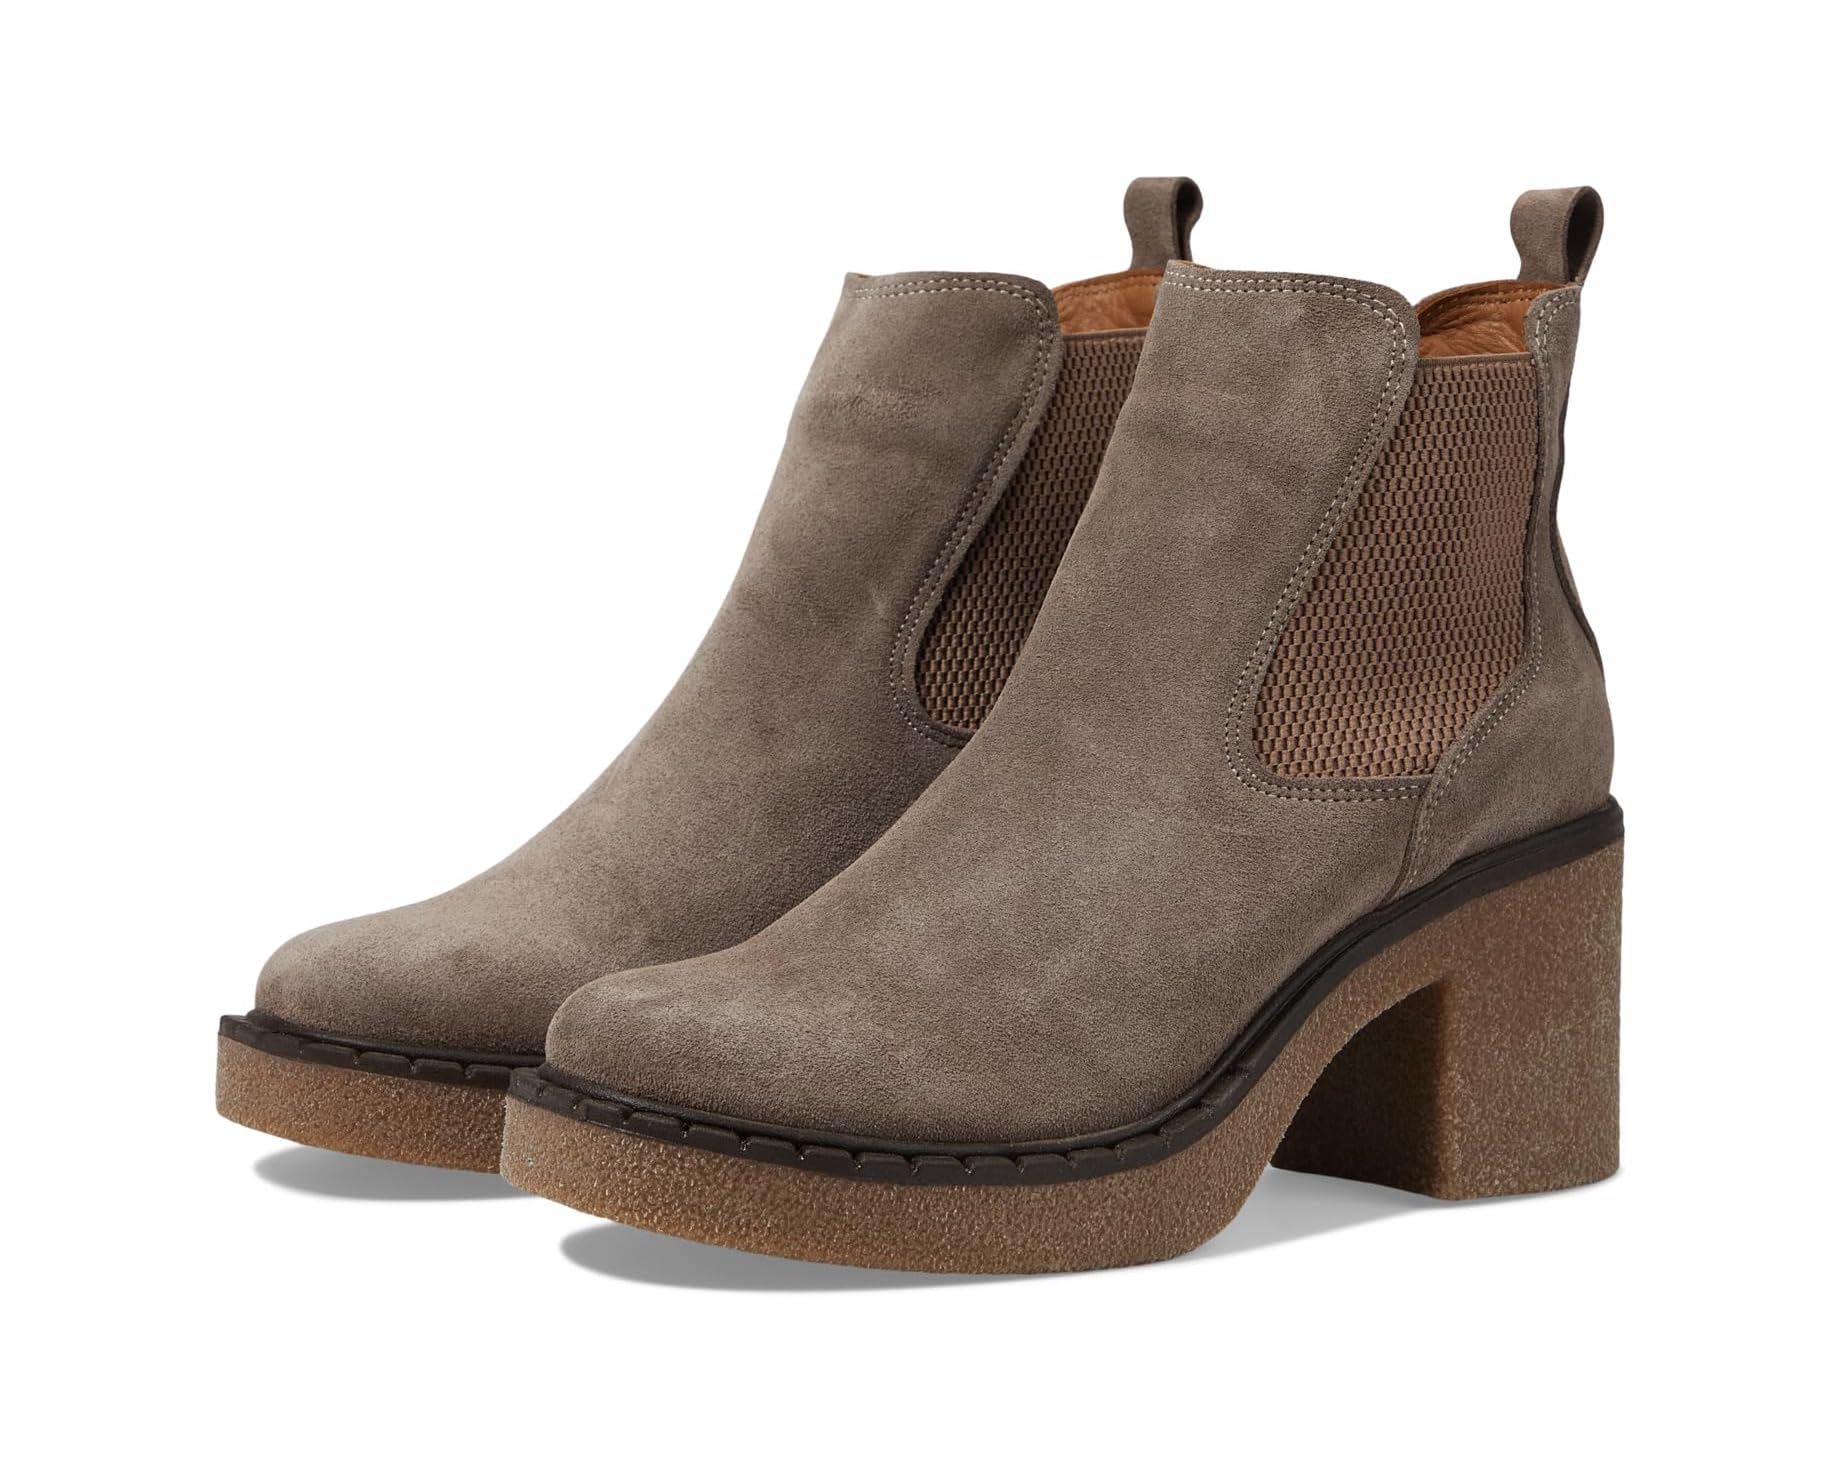 Women's Bueno Hanna Color: Taupe Suede 